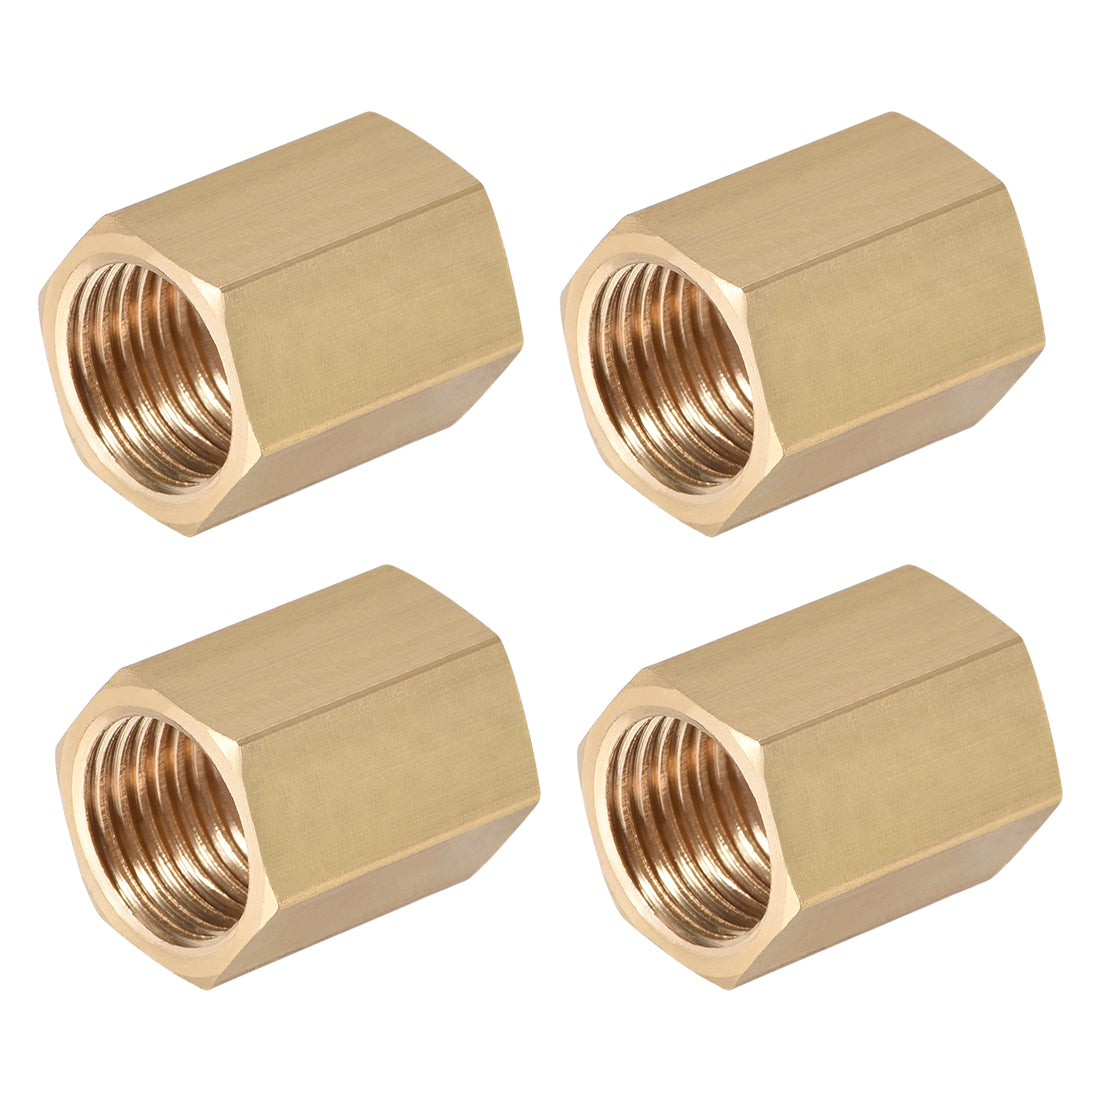 uxcell Uxcell Brass Pipe Fitting Connector Straight Hex Nipple Coupler 1/4 x 1/4 G Female Thread Gold Tone 4pcs